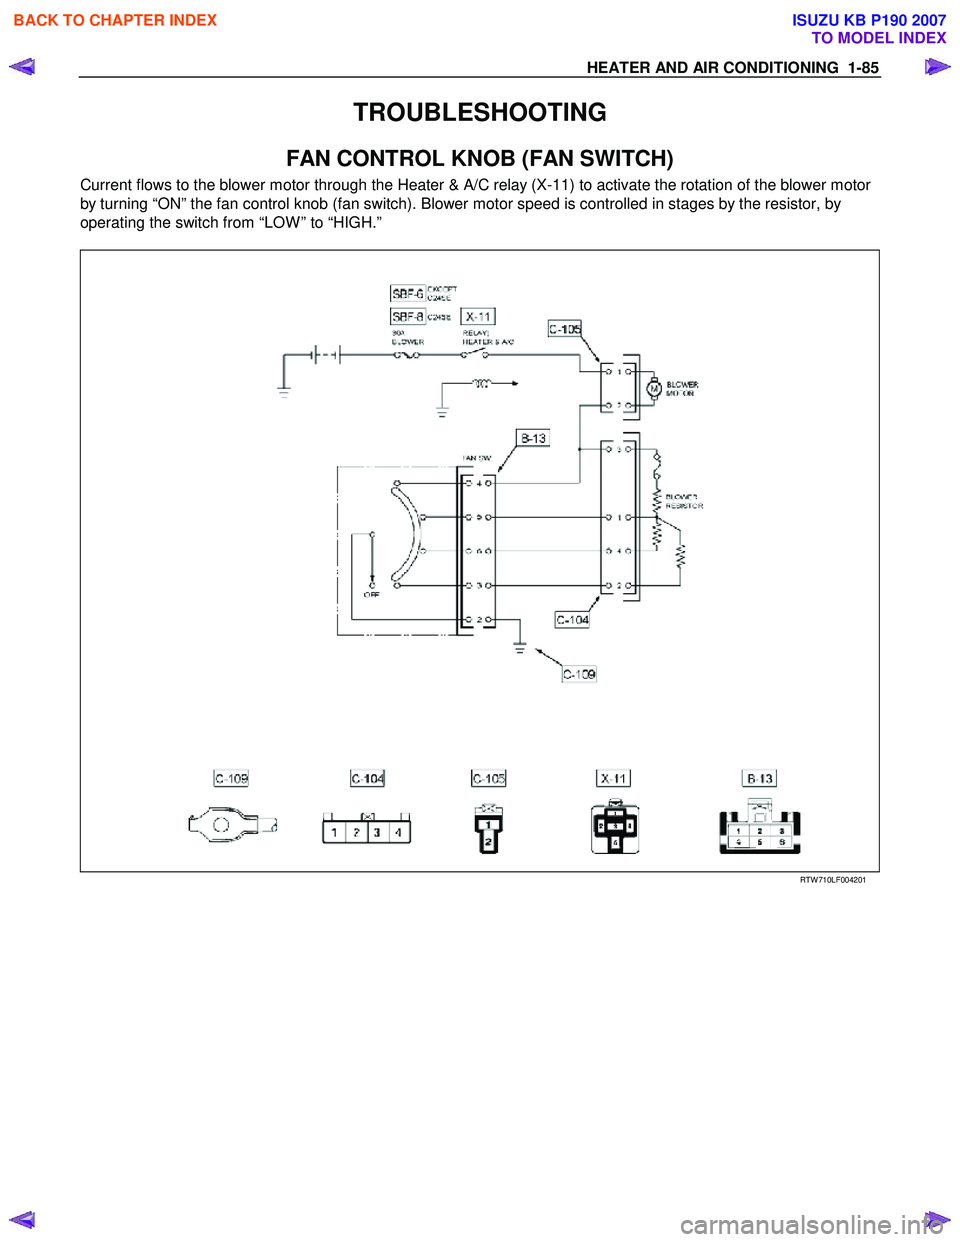 ISUZU KB P190 2007  Workshop Repair Manual HEATER AND AIR CONDITIONING  1-85 
TROUBLESHOOTING 
FAN CONTROL KNOB (FAN SWITCH)  
Current flows to the blower motor through the Heater & A/C relay (X-11) to activate the rotation of the blower motor